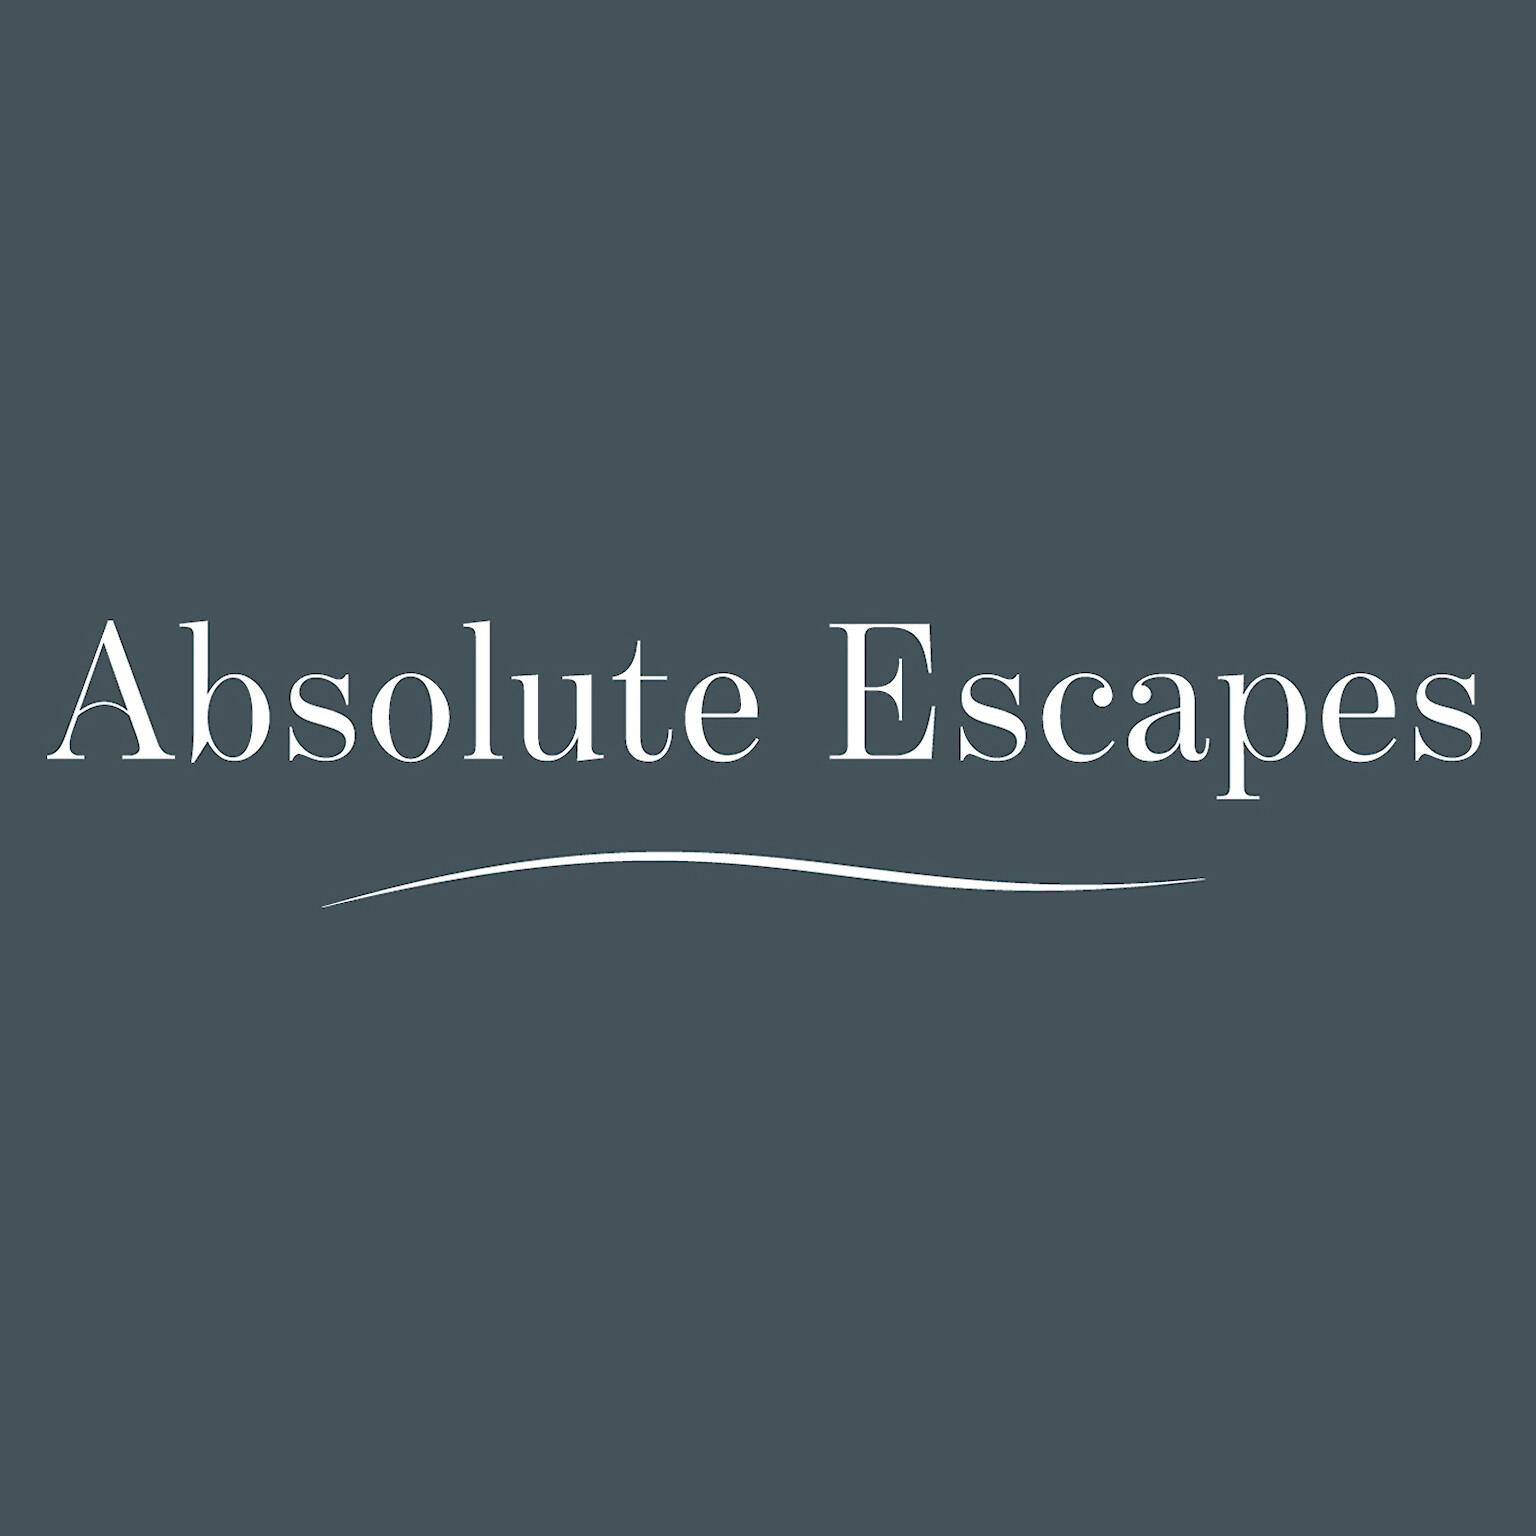 Absolute Escapes | Self-Drive Holidays Logo